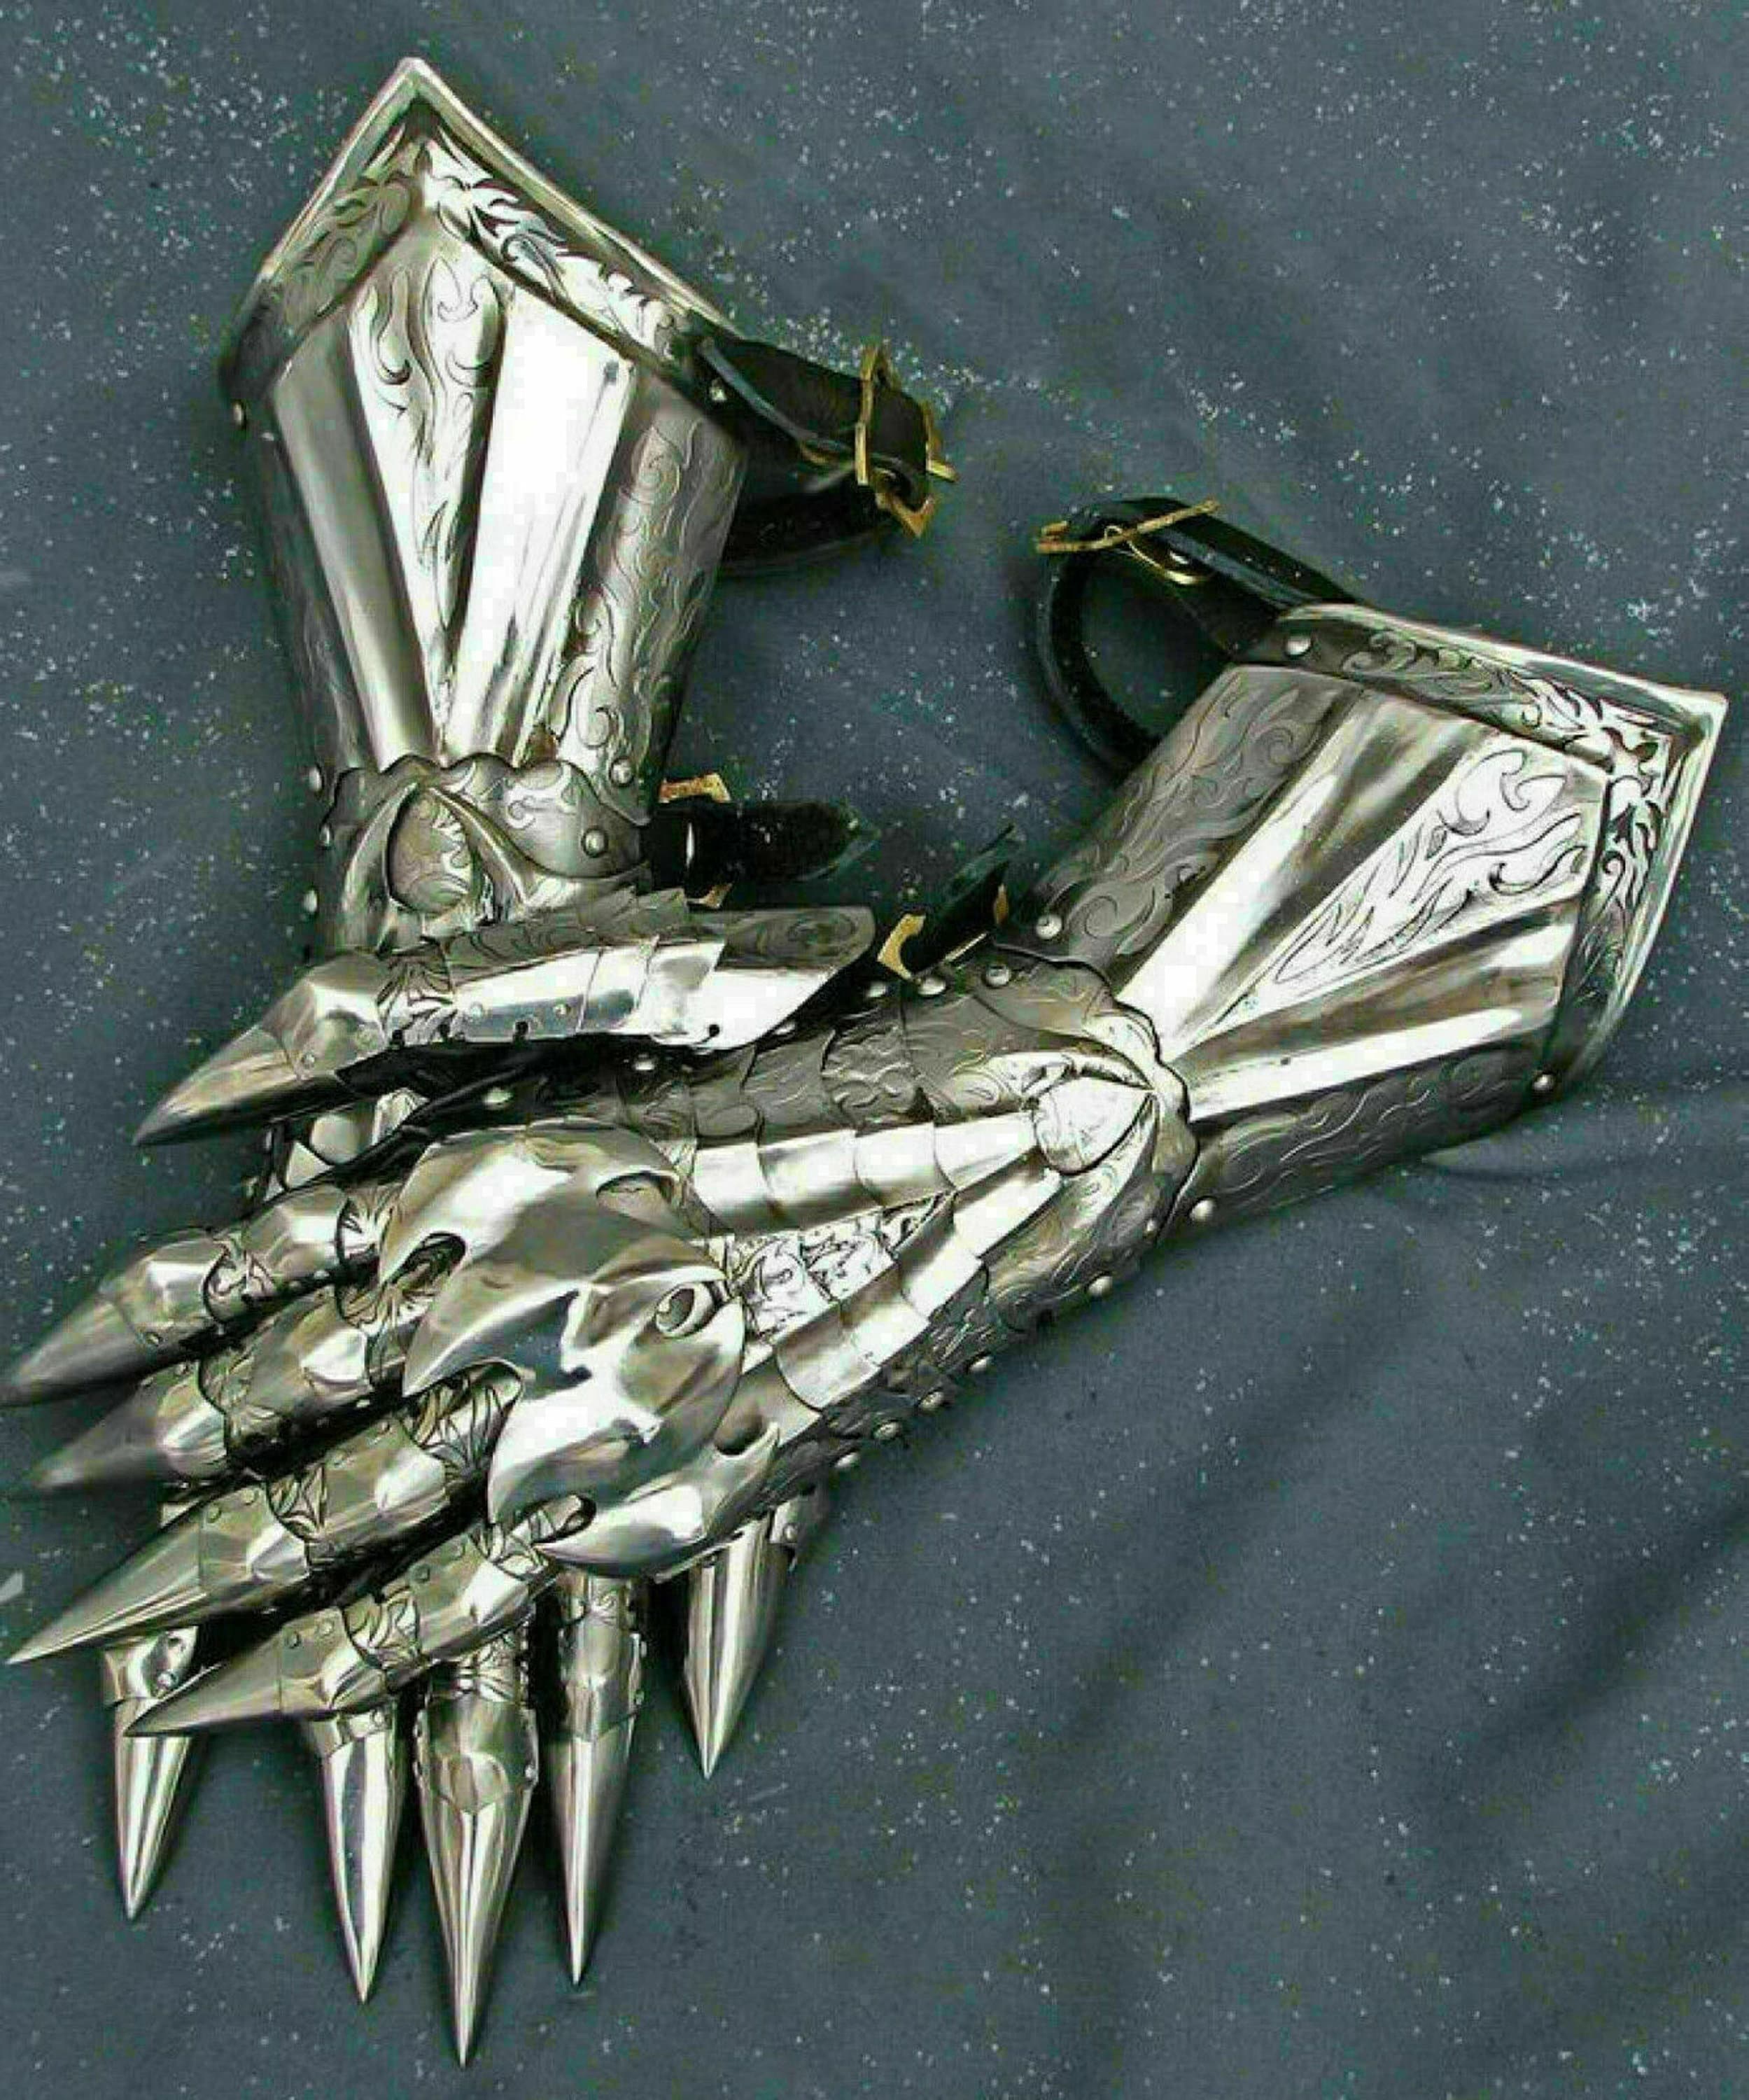 Gauntlet Gloves Armor Pair w/ Brass Accents  Medieval Knight Crusader,Steel+F>S 